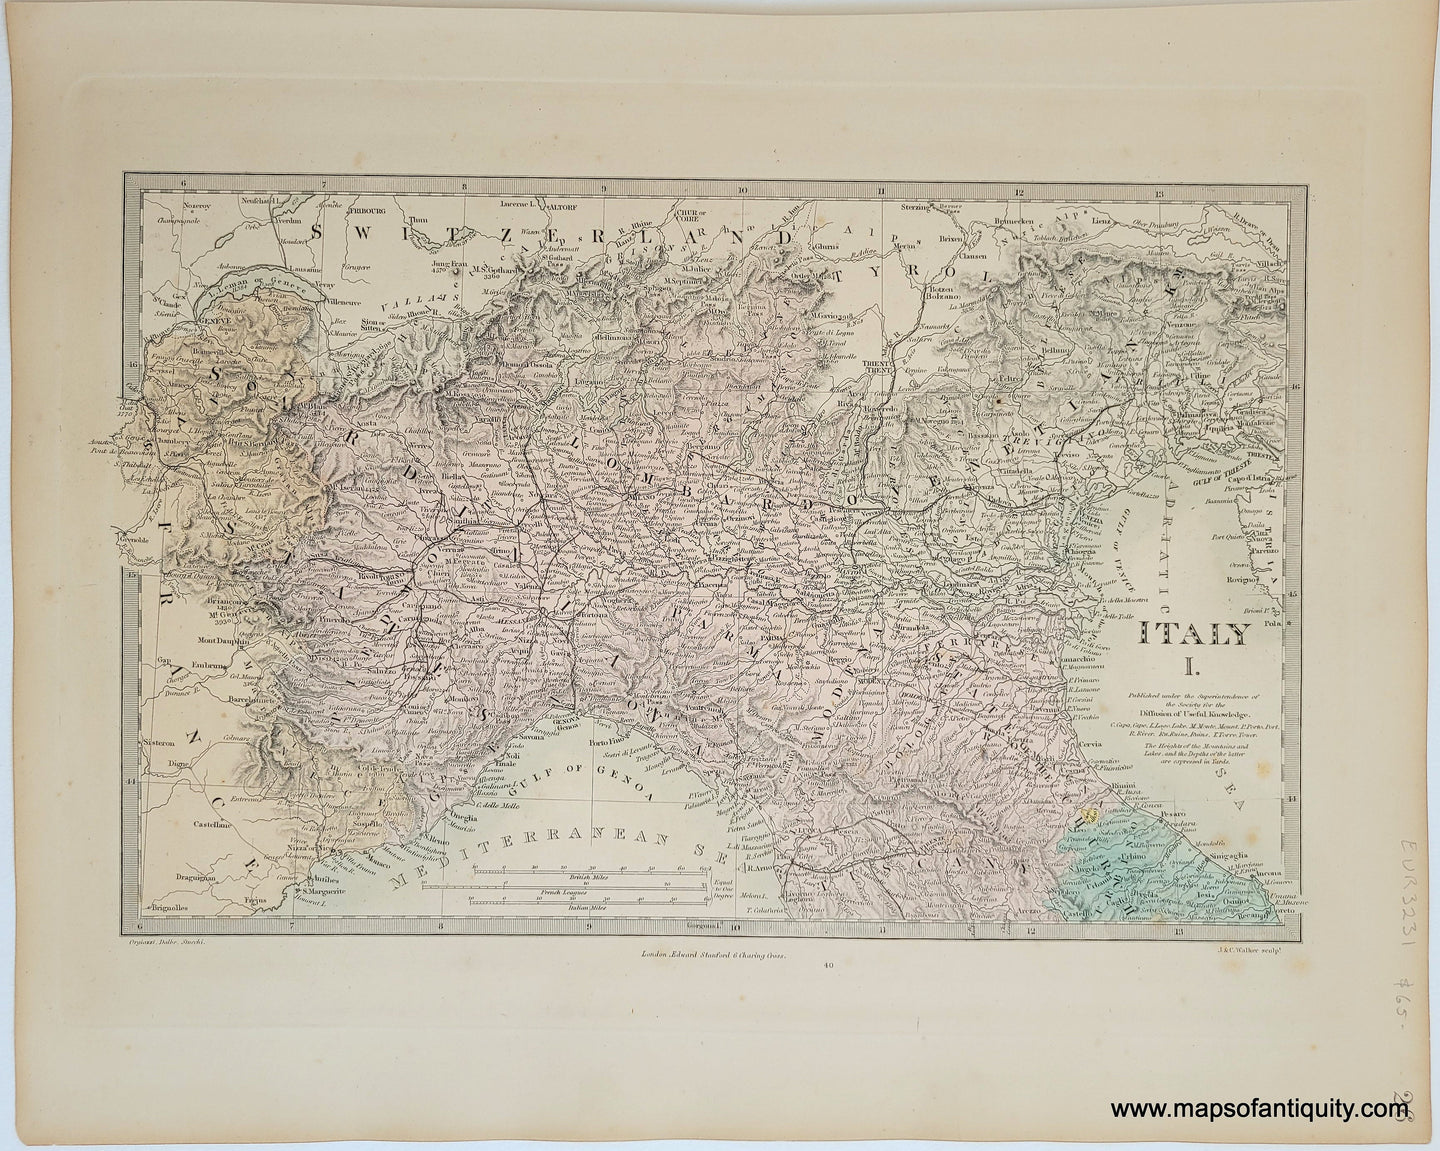 Genuine-Antique-Map-Italy-I-Italy--1860-SDUK-Society-for-the-Diffusion-of-Useful-Knowledge-Maps-Of-Antiquity-1800s-19th-century